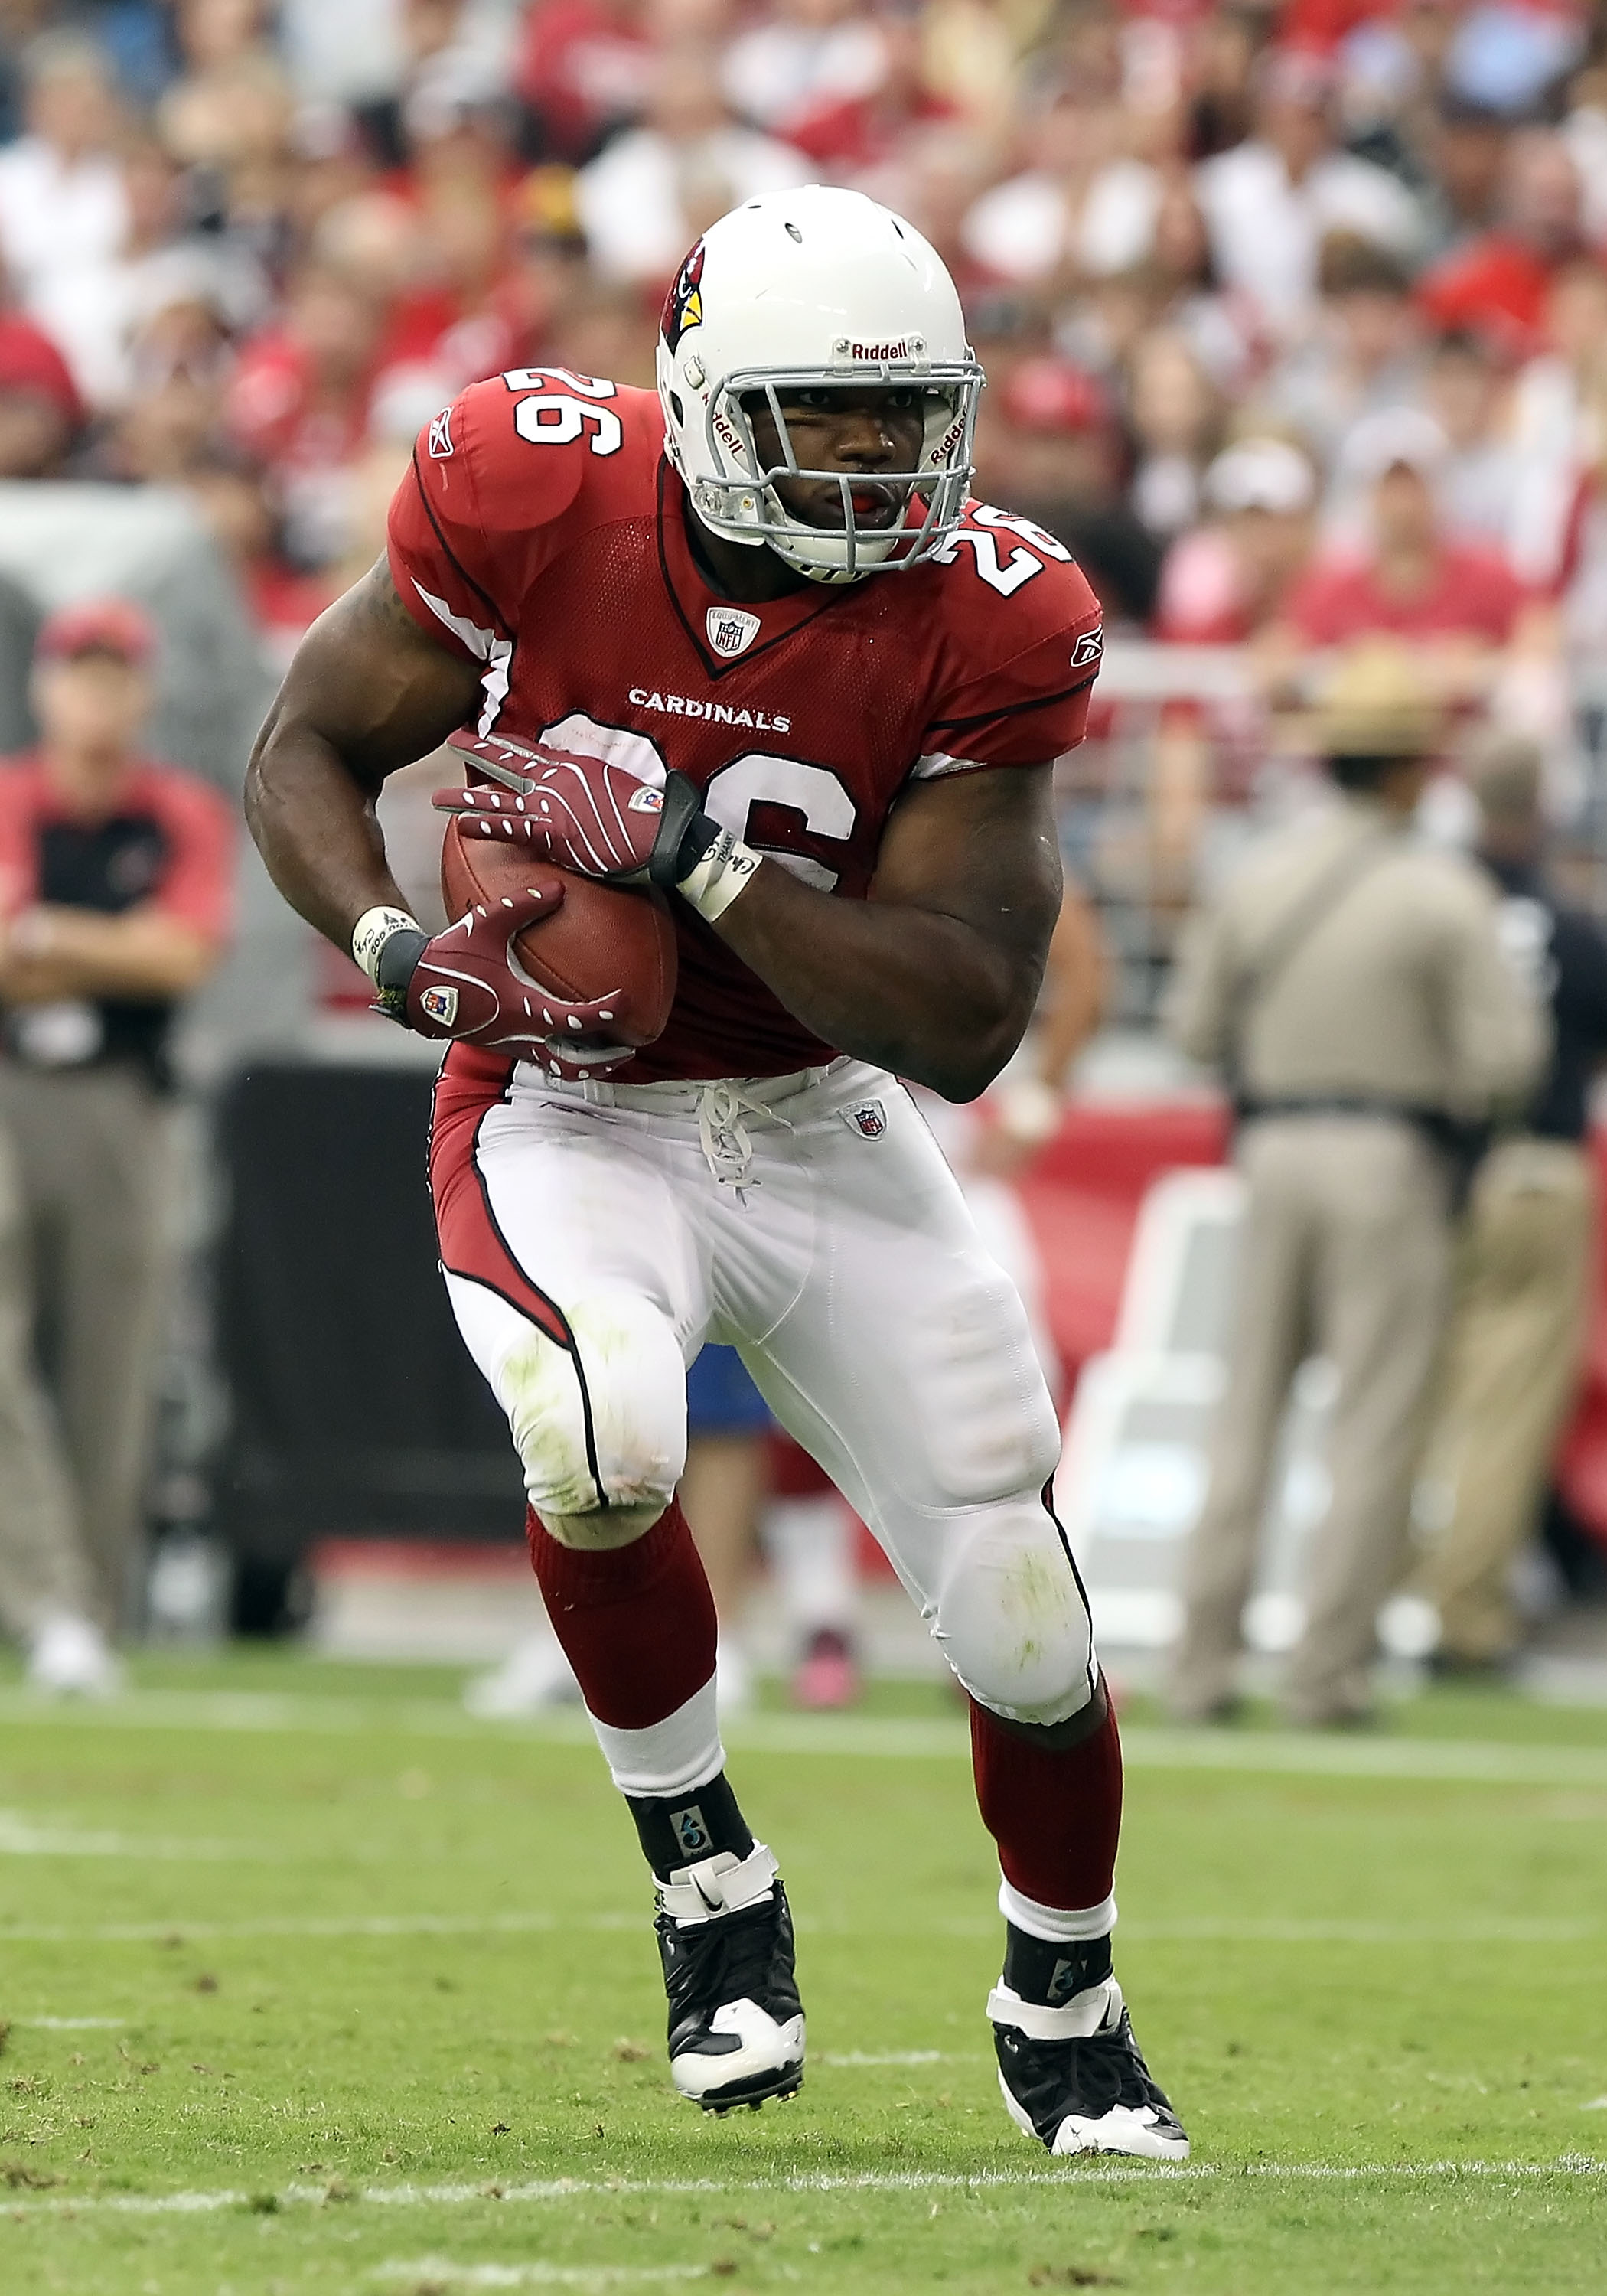 GLENDALE, AZ - OCTOBER 10:  Runningback Beanie Wells #26 of the Arizona Cardinals runs with the football during the NFL game against the New Orleans Saints at the University of Phoenix Stadium on October 10, 2010 in Glendale, Arizona. The Cardinals defeat